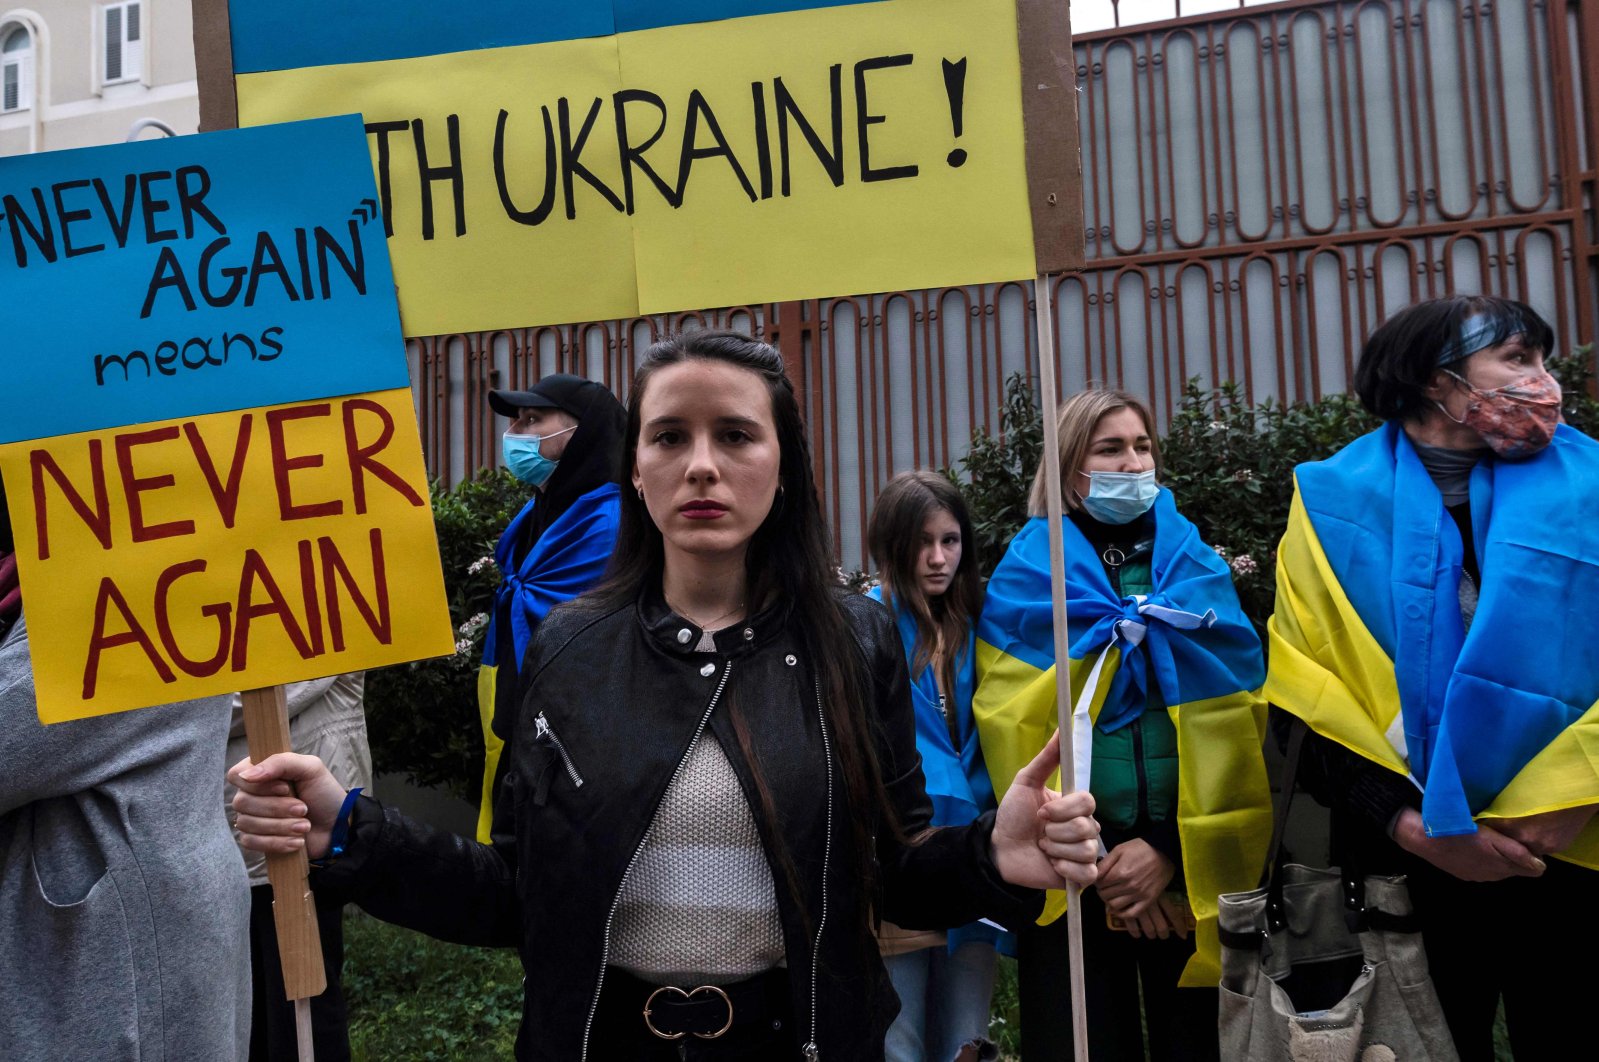 Ukrainians and Cypriots take part in a protest against Russia&#039;s military invasion of Ukraine, outside the Russian embassy in the Cypriot capital Lefkoşa (Nicosia) on March 1, 2022. (AFP Photo)